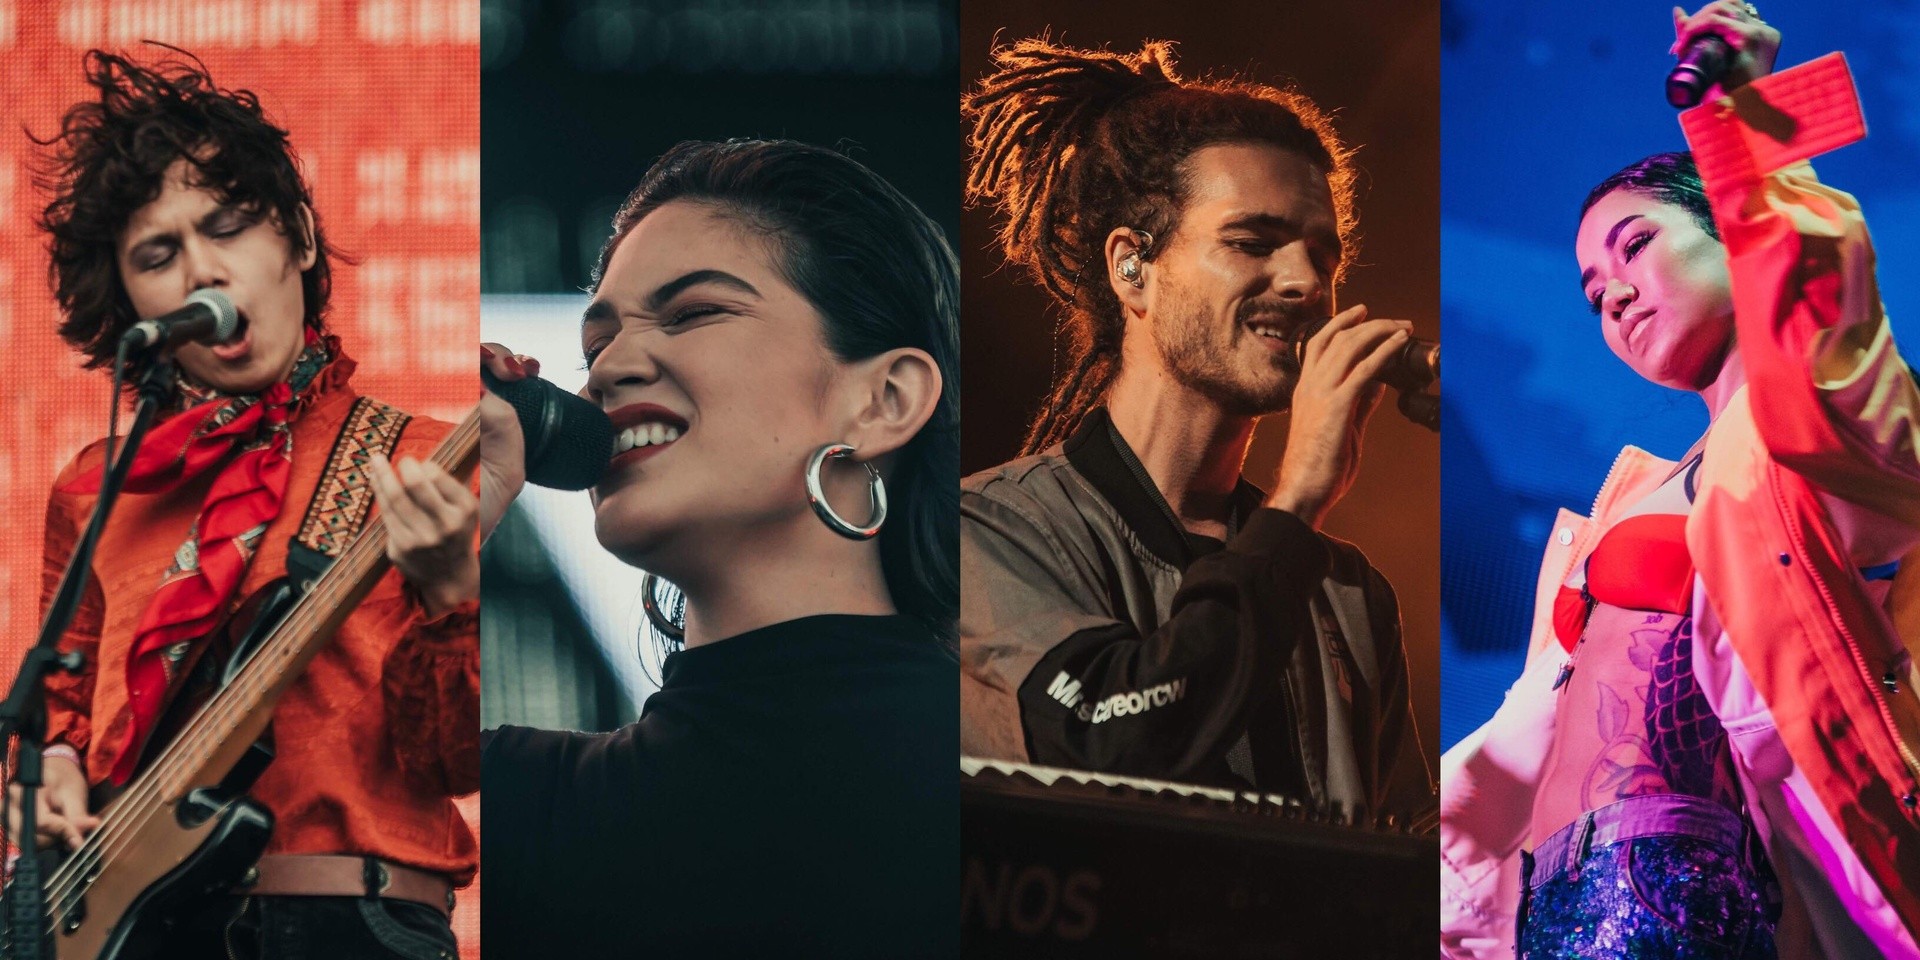 Wanderland 2018 highlights featuring FKJ, Jhene Aiko, IV of Spades, and more – photo gallery